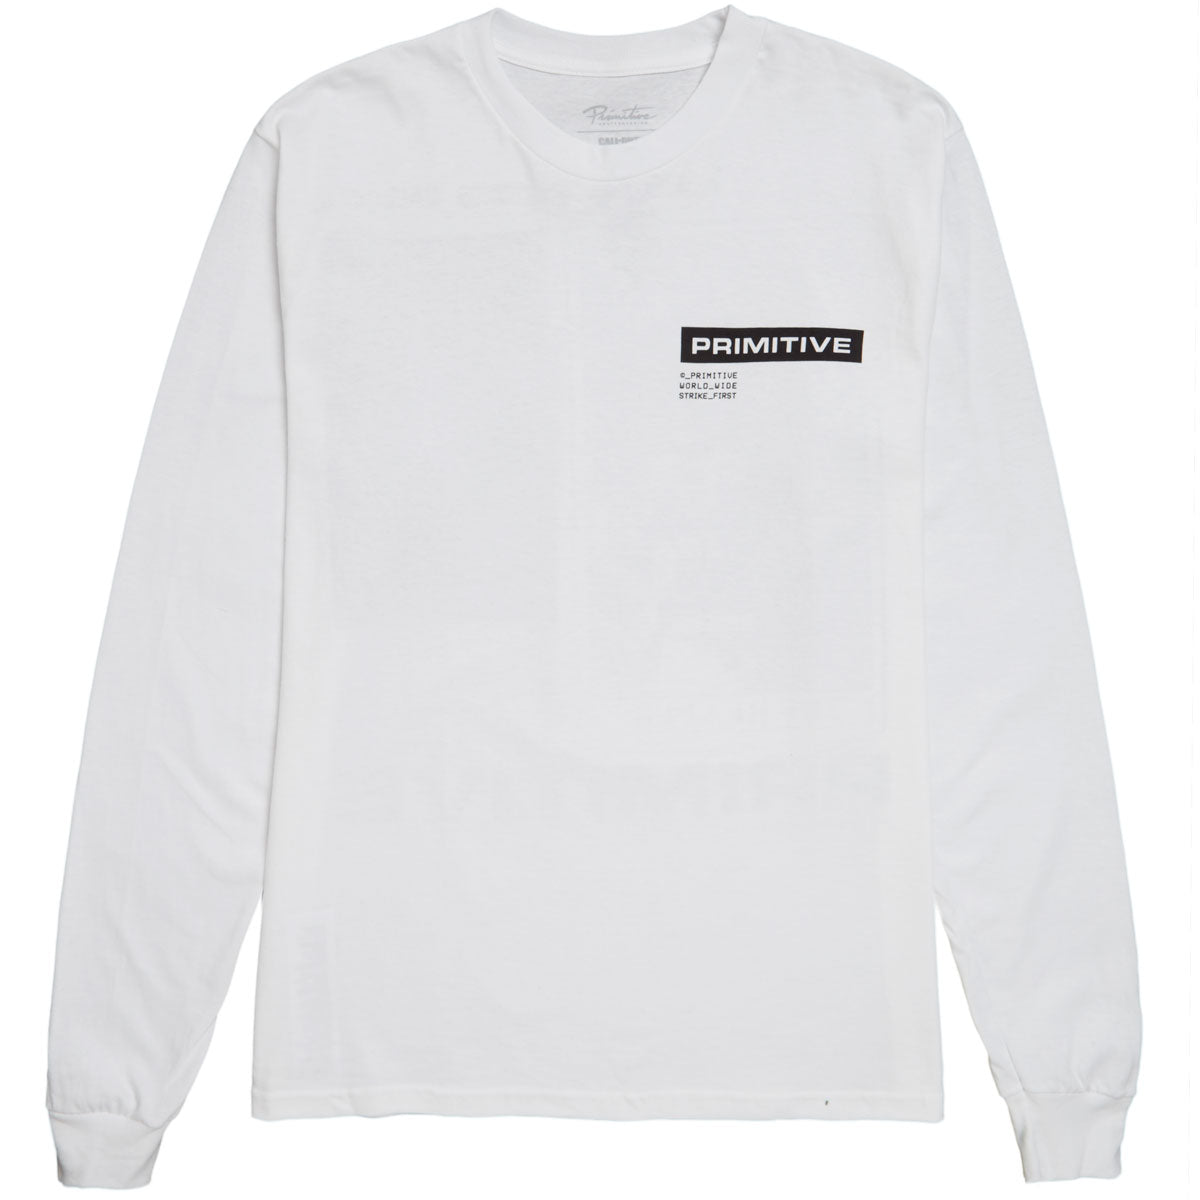 Primitive x Call Of Duty Tactics Long Sleeve T-Shirt - White image 2